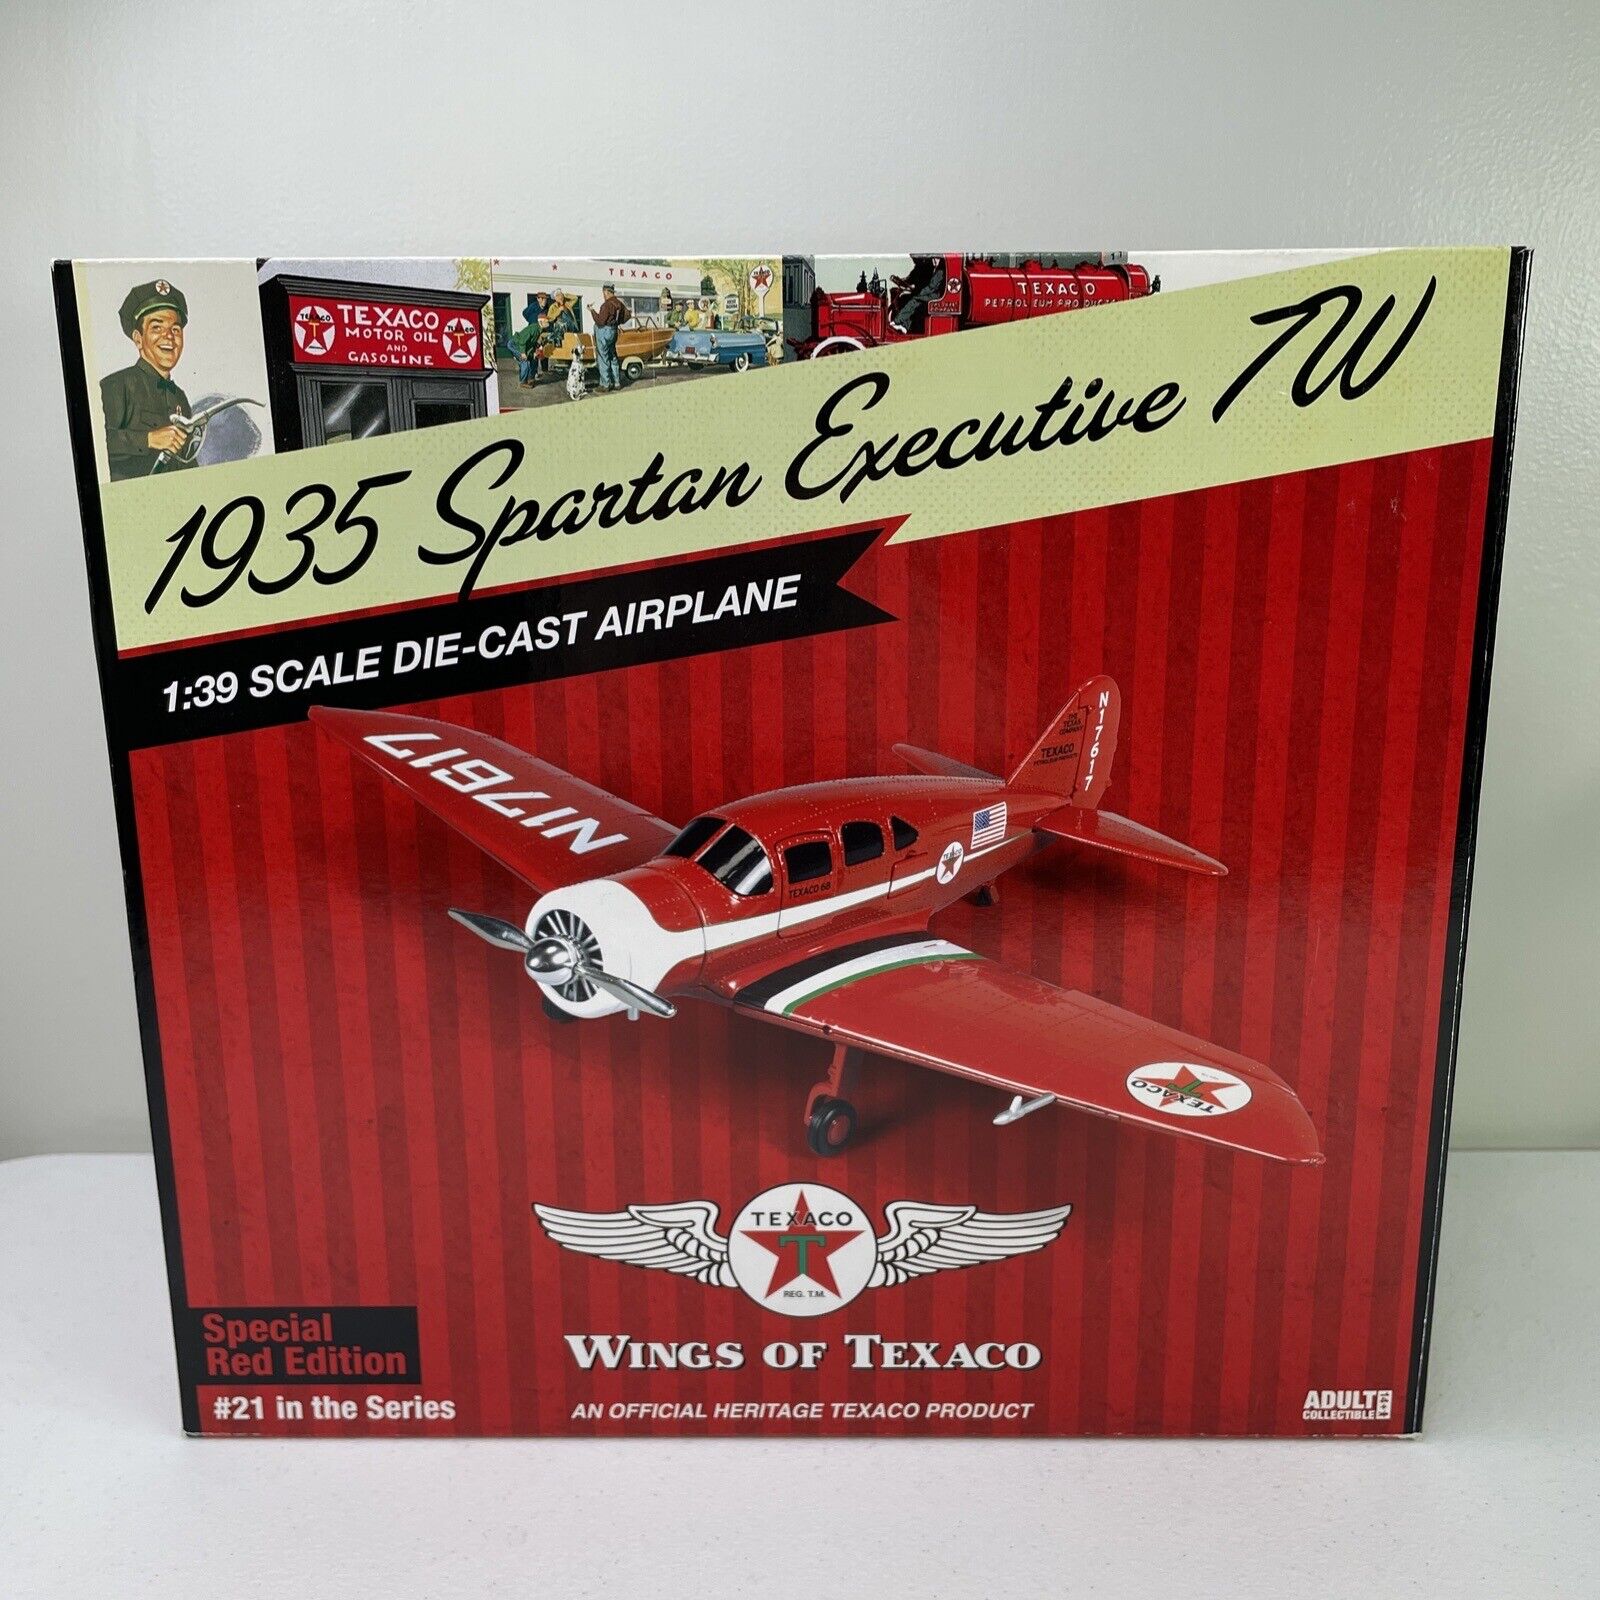 Wings Of Texaco 1935 Spartan Executive 7W Airplane Special Red Edition Die-Cast